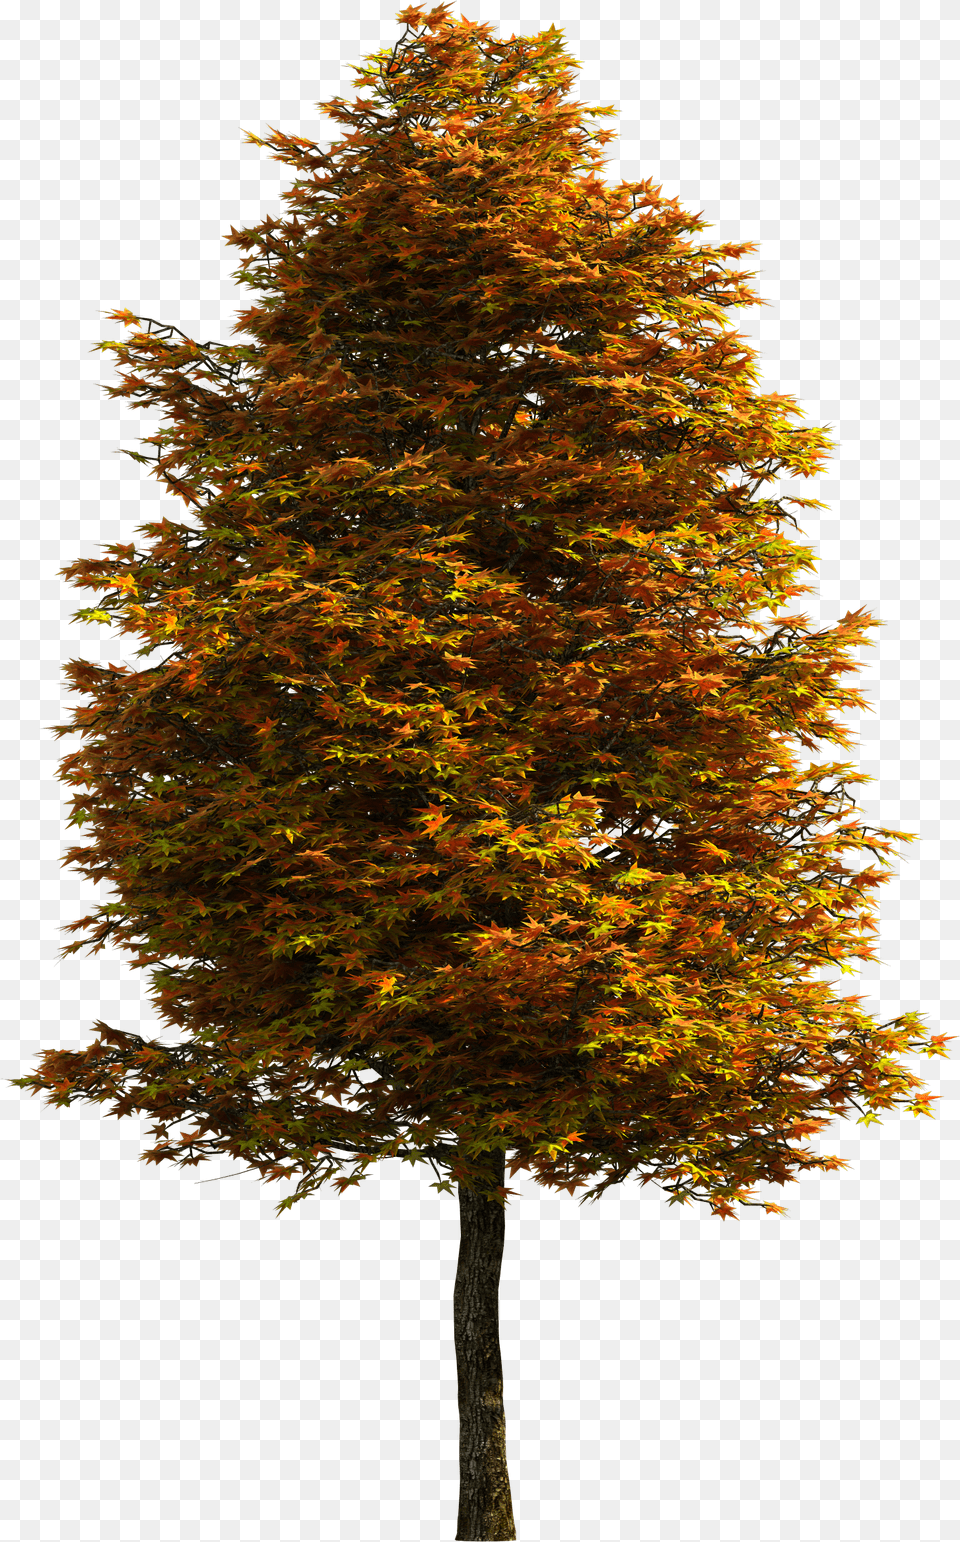 Download Tree Clipart Pine Tree Transparent Background, Leaf, Maple, Plant, Tree Trunk Png Image